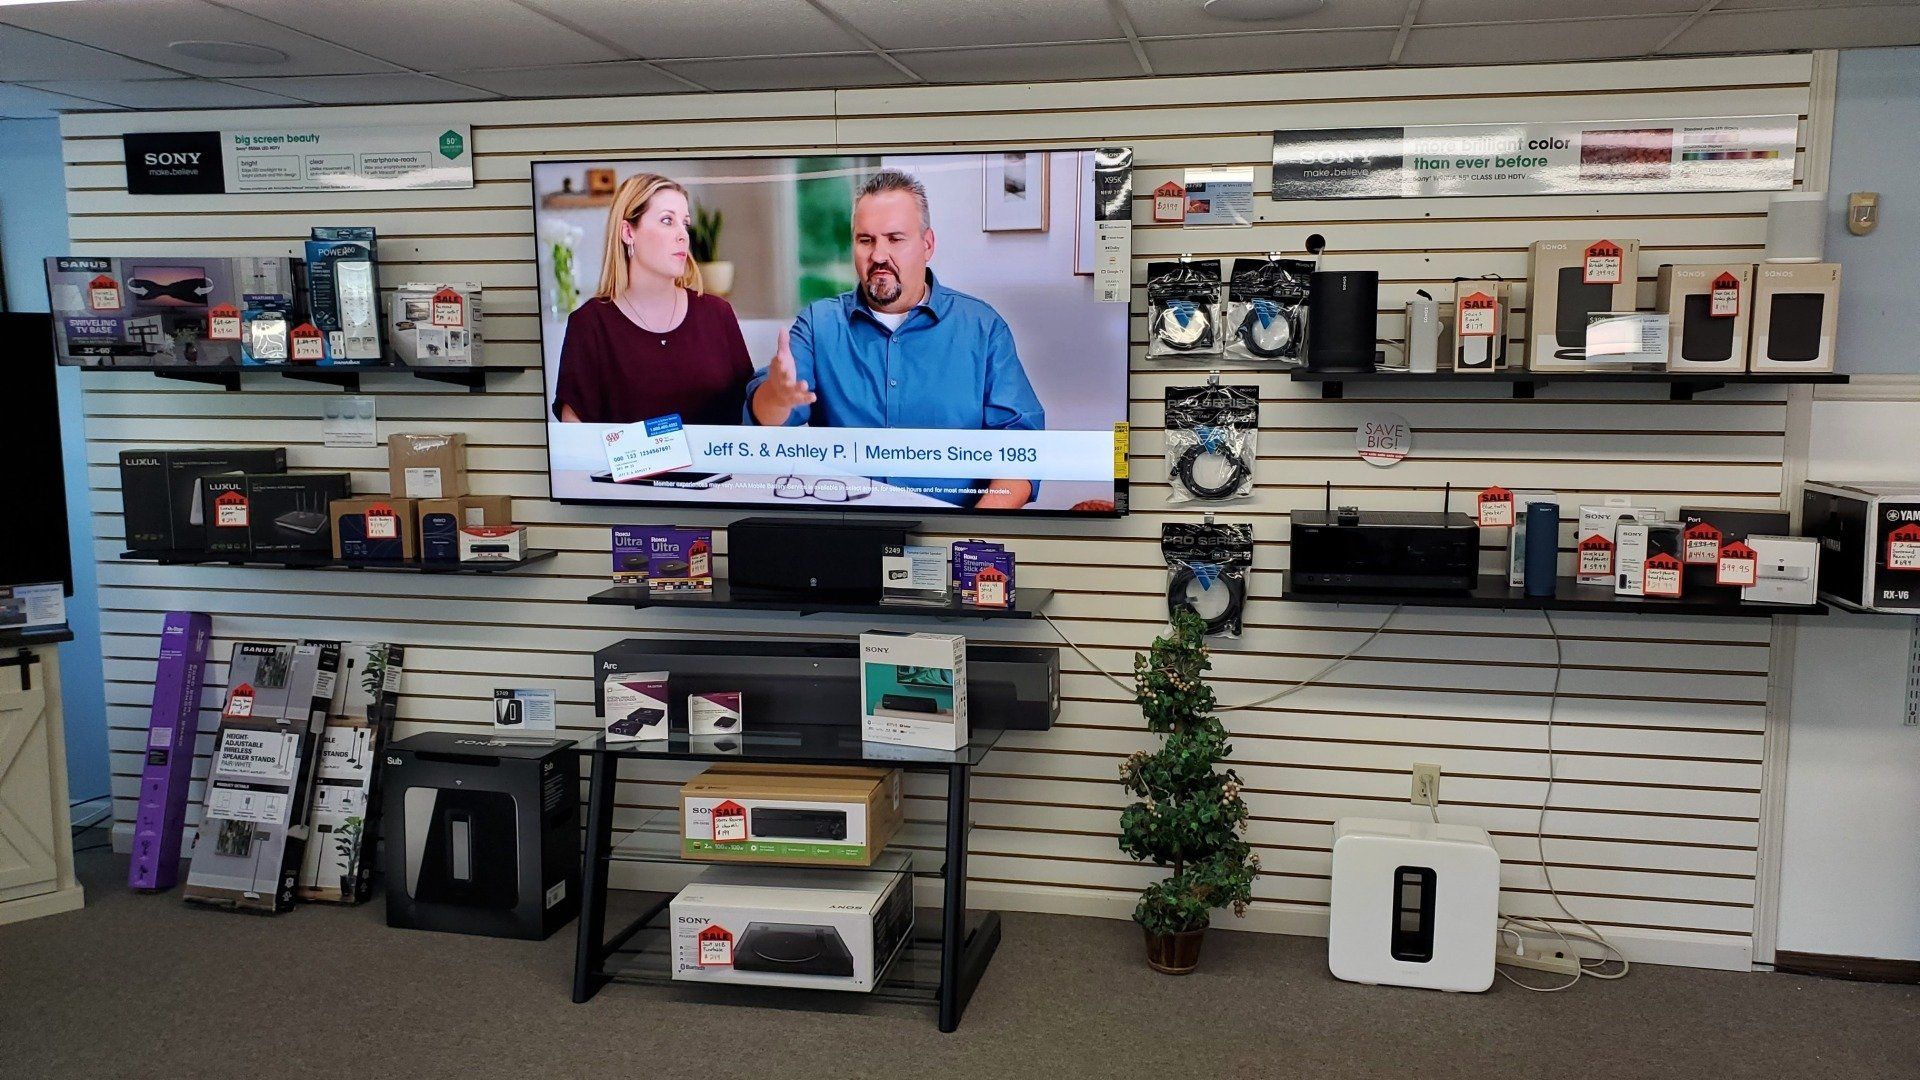 a sony tv, sonos equipment, audio receivers, and wifi mesh systems are on display at Fisher Electronics showroom